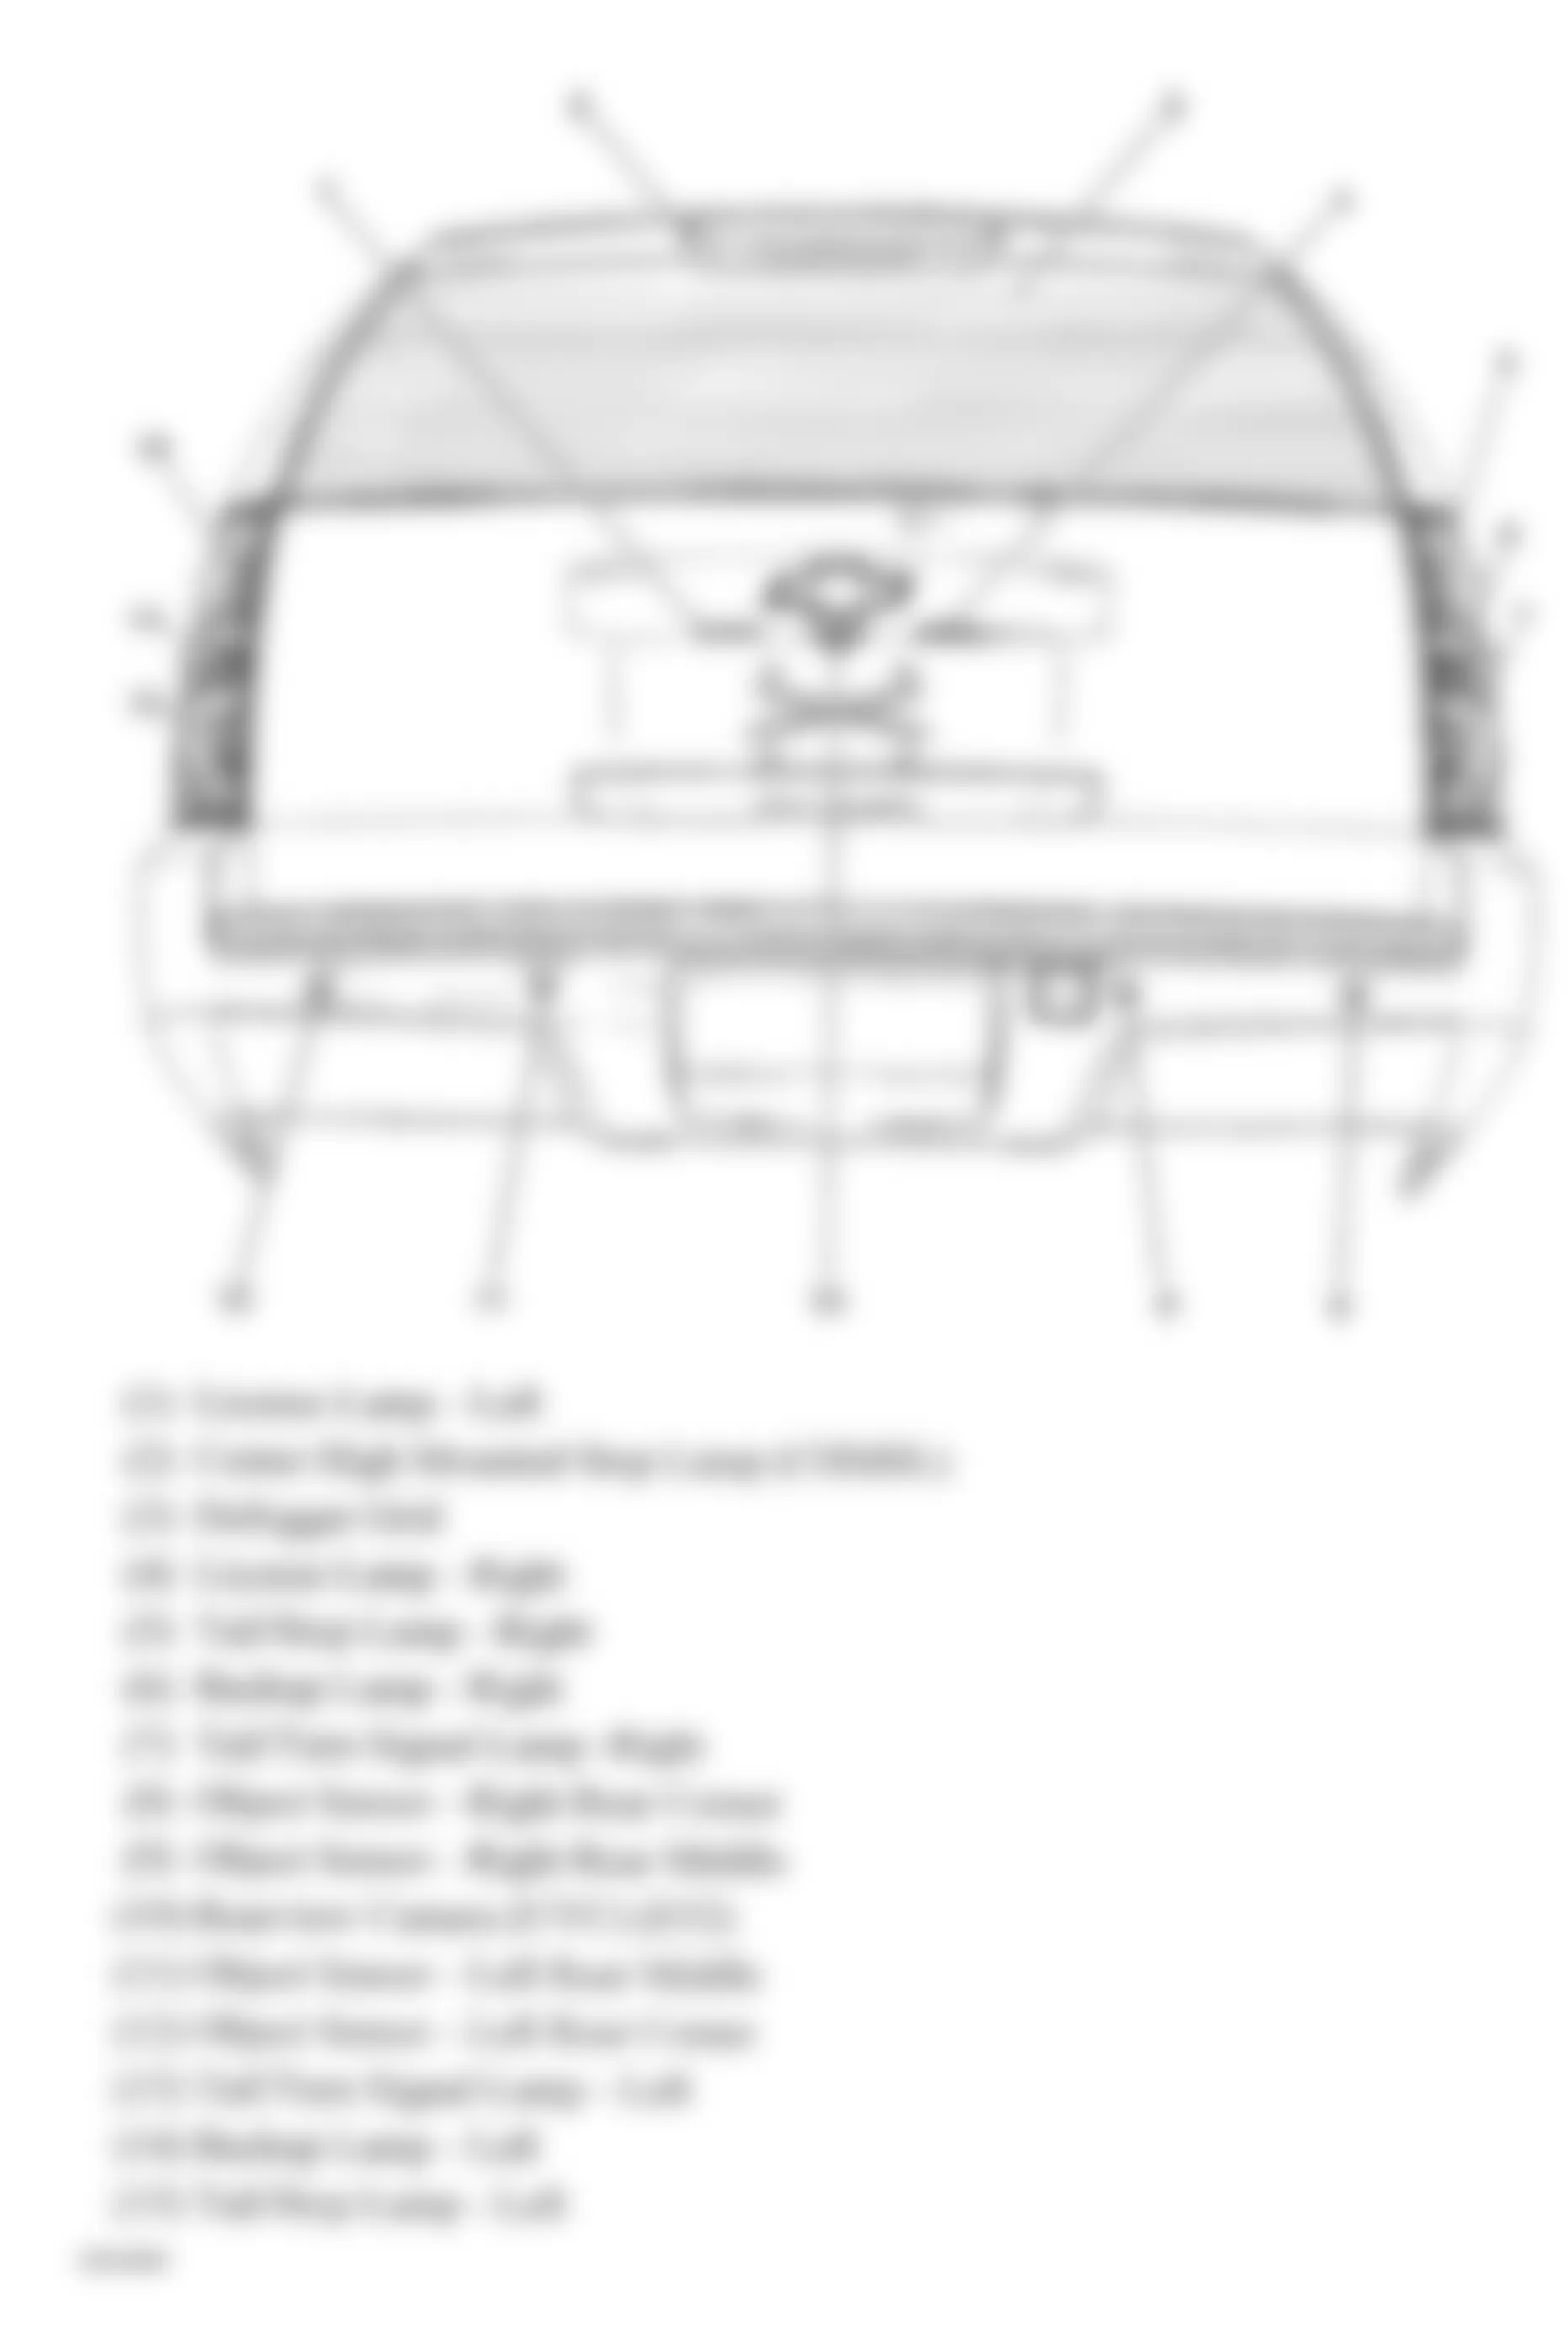 GMC Yukon XL C2500 2008 - Component Locations -  Rear Of Vehicle (Avalanche, Suburban & Tahoe W/One Piece Liftgate)